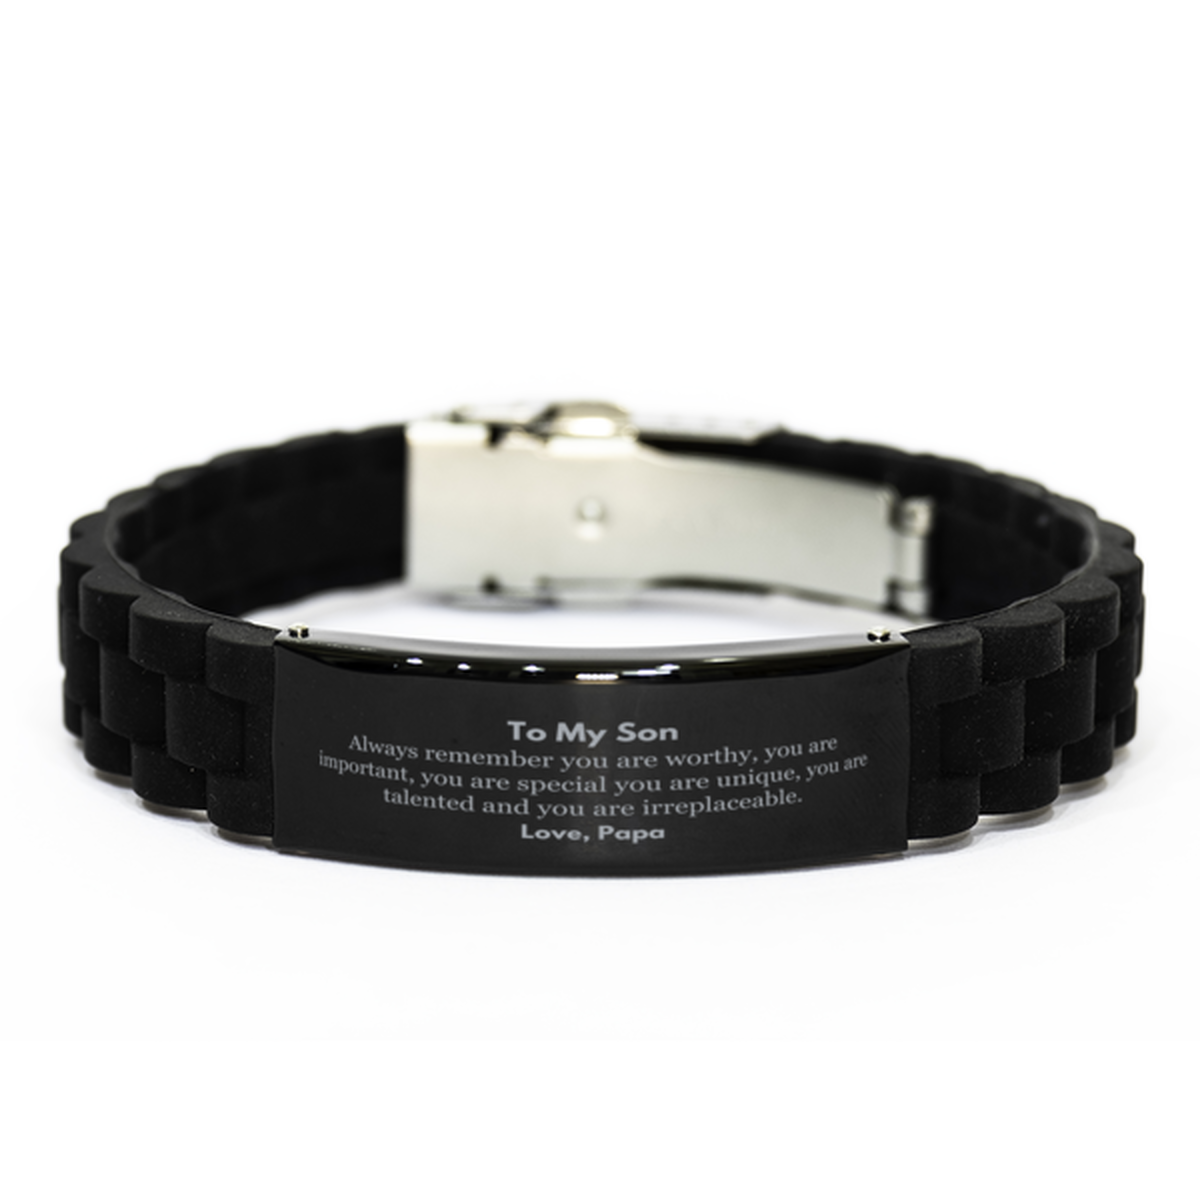 Son Birthday Gifts from Papa, Inspirational Black Glidelock Clasp Bracelet for Son Christmas Graduation Gifts for Son Always remember you are worthy, you are important. Love, Papa